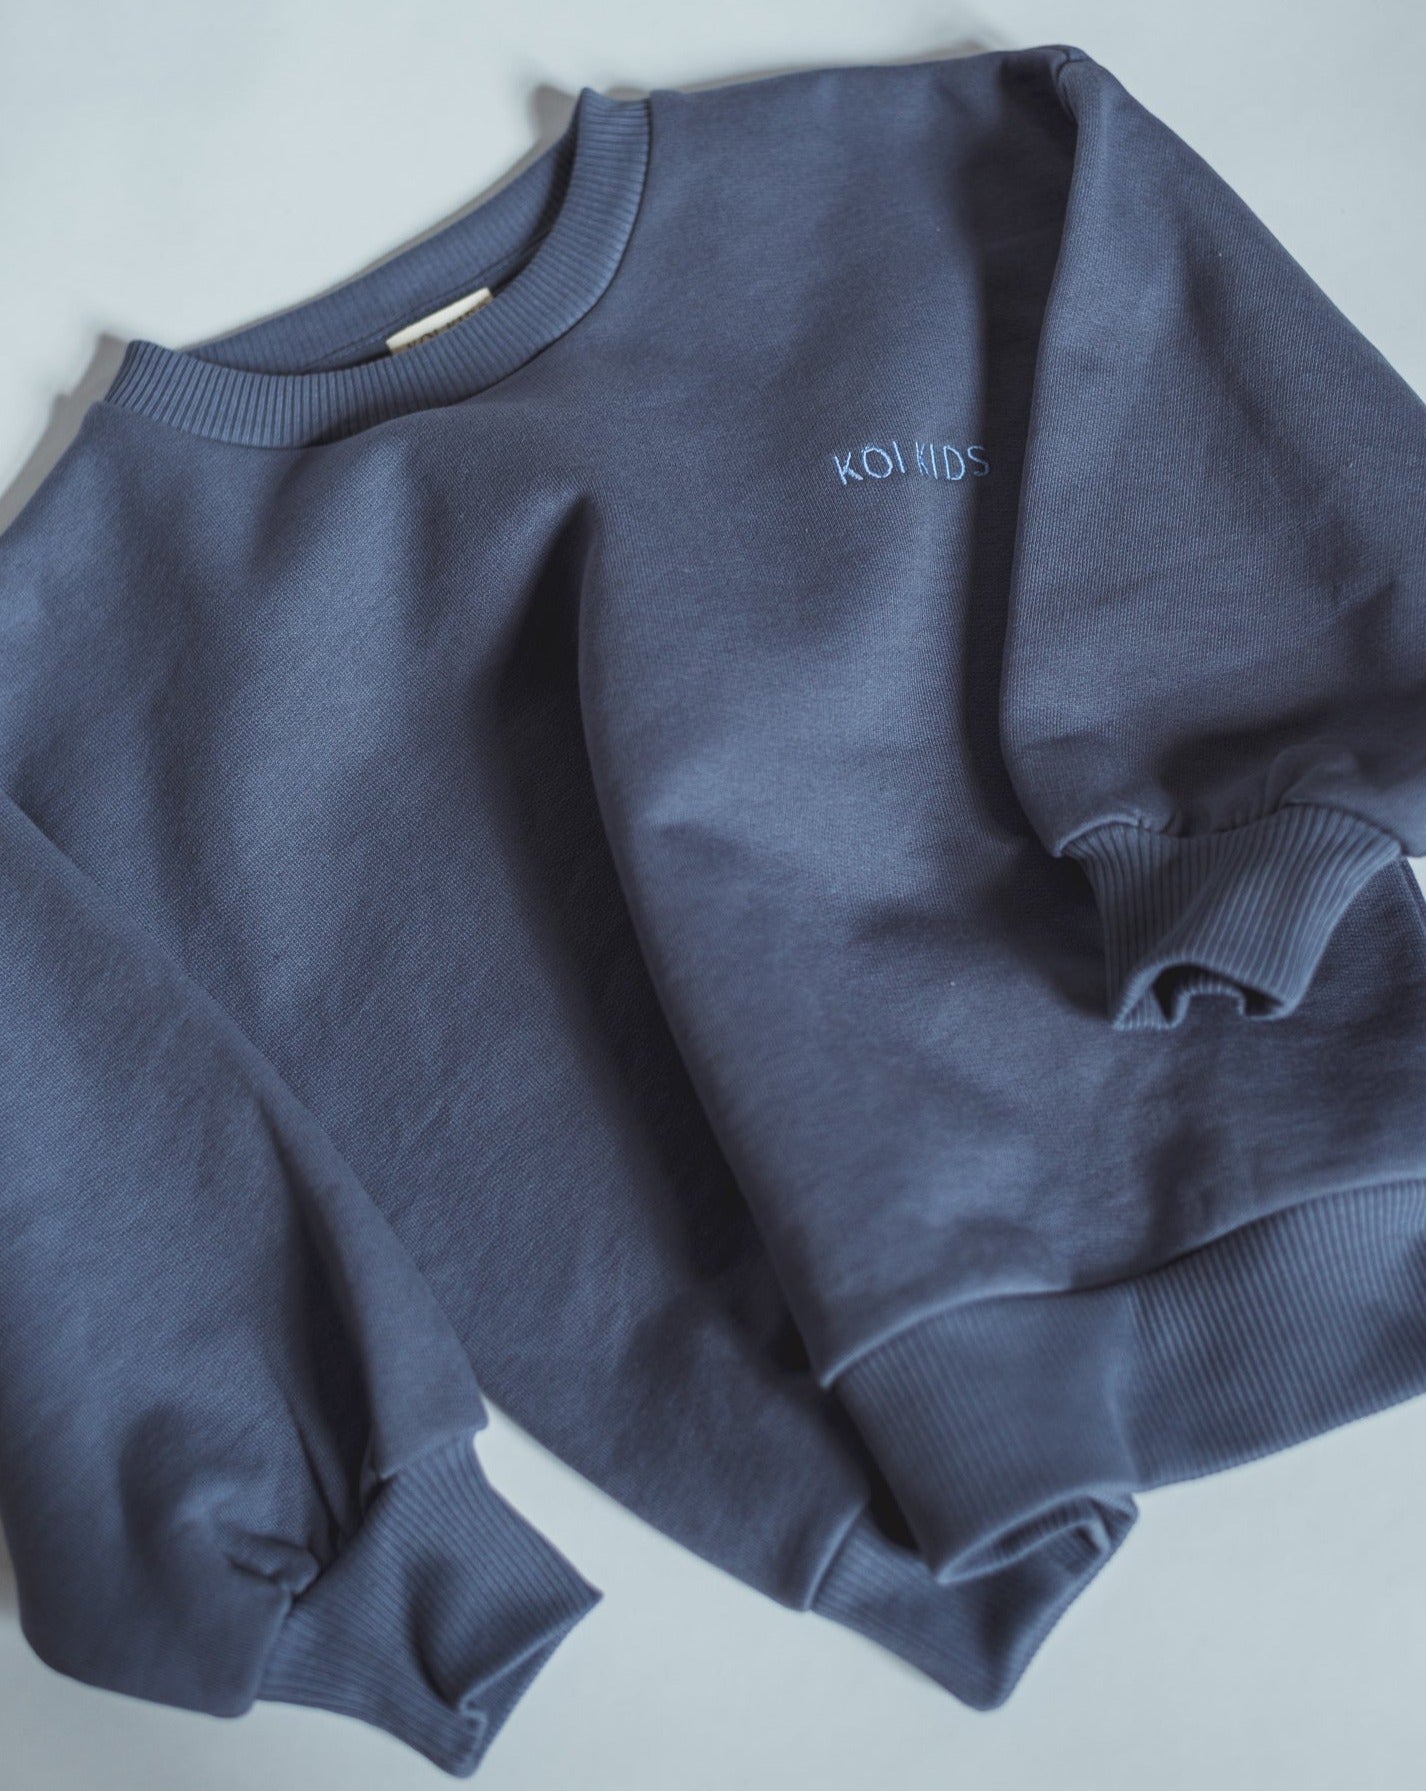 Denim blue sweatshirt with light blue logo embroidery, dropped shoulders and foldable cuffs with an oversized fit.